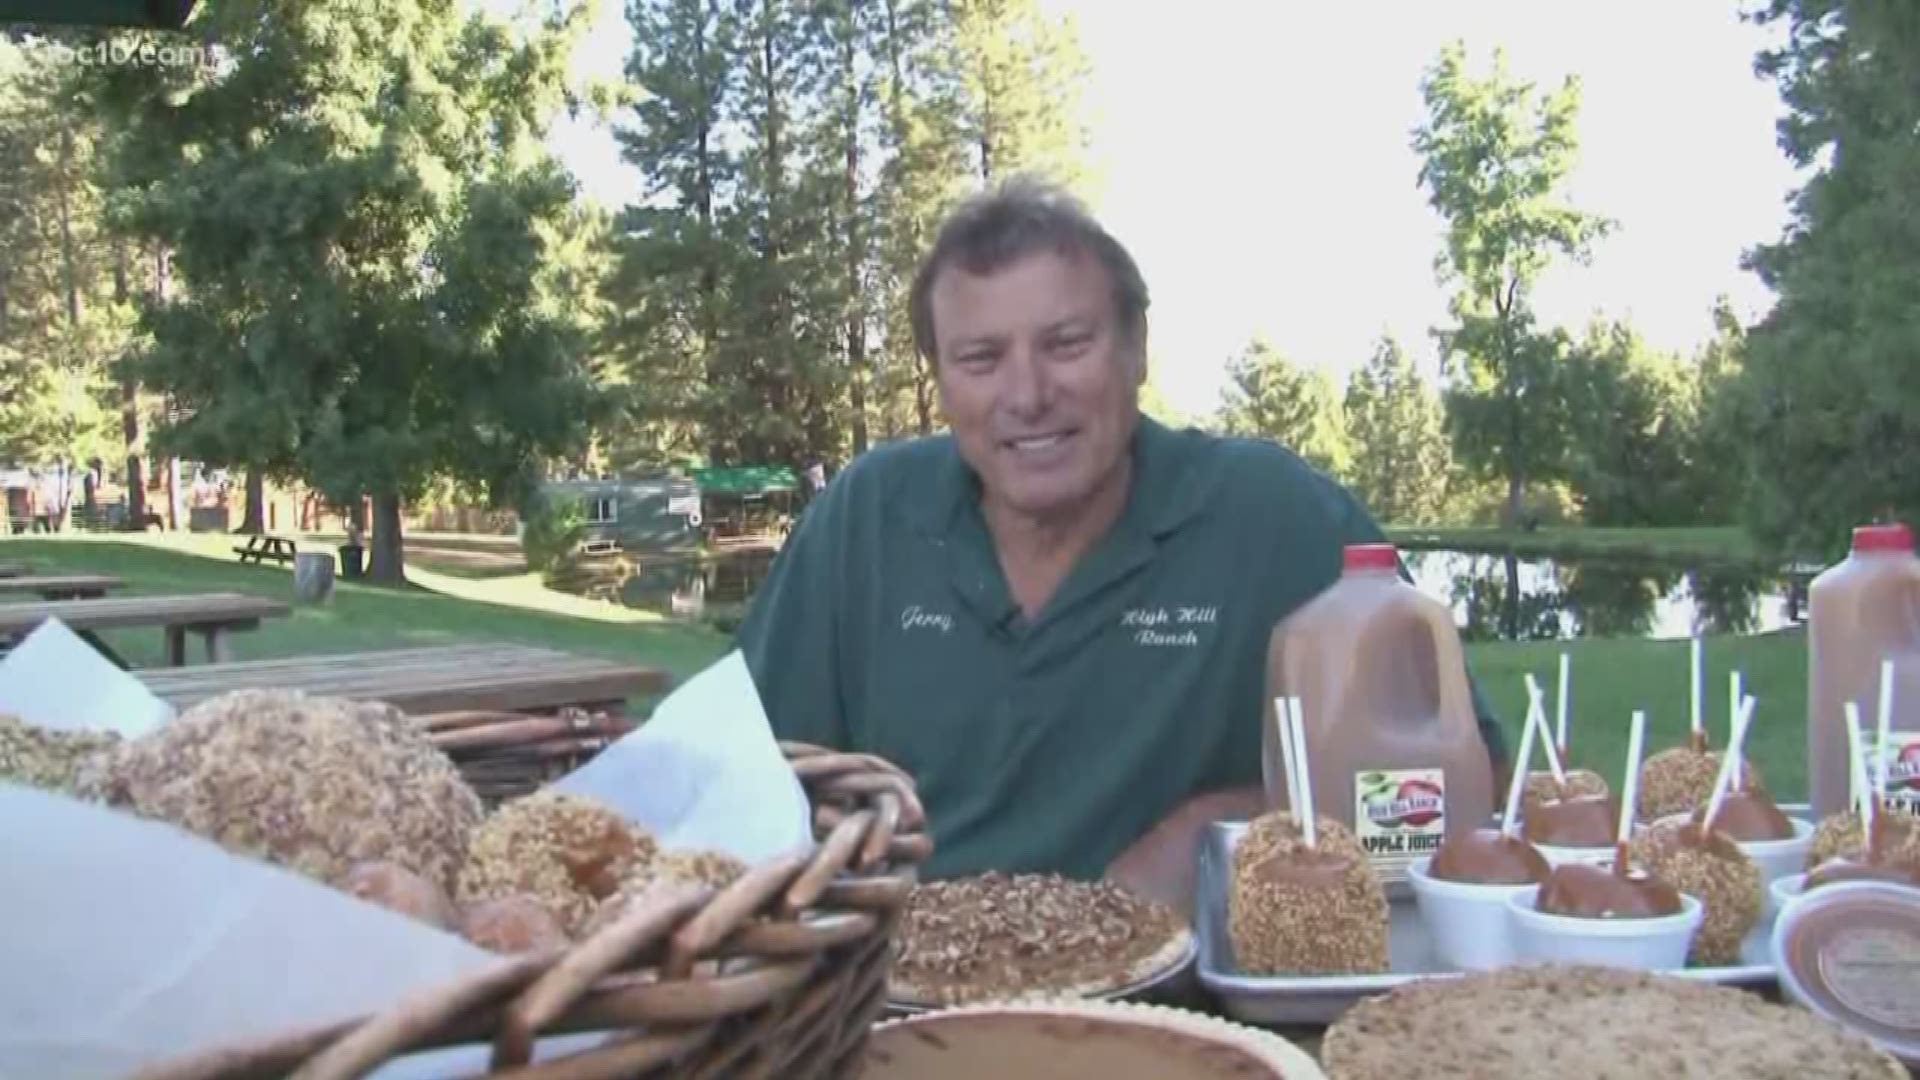 While most of the growers at Apple Hill open on Labor Day weekend, the owner of High Hill Ranch, Jerry Visman, joined us today to talk about their opening Saturday and a variety of different apple combinations.